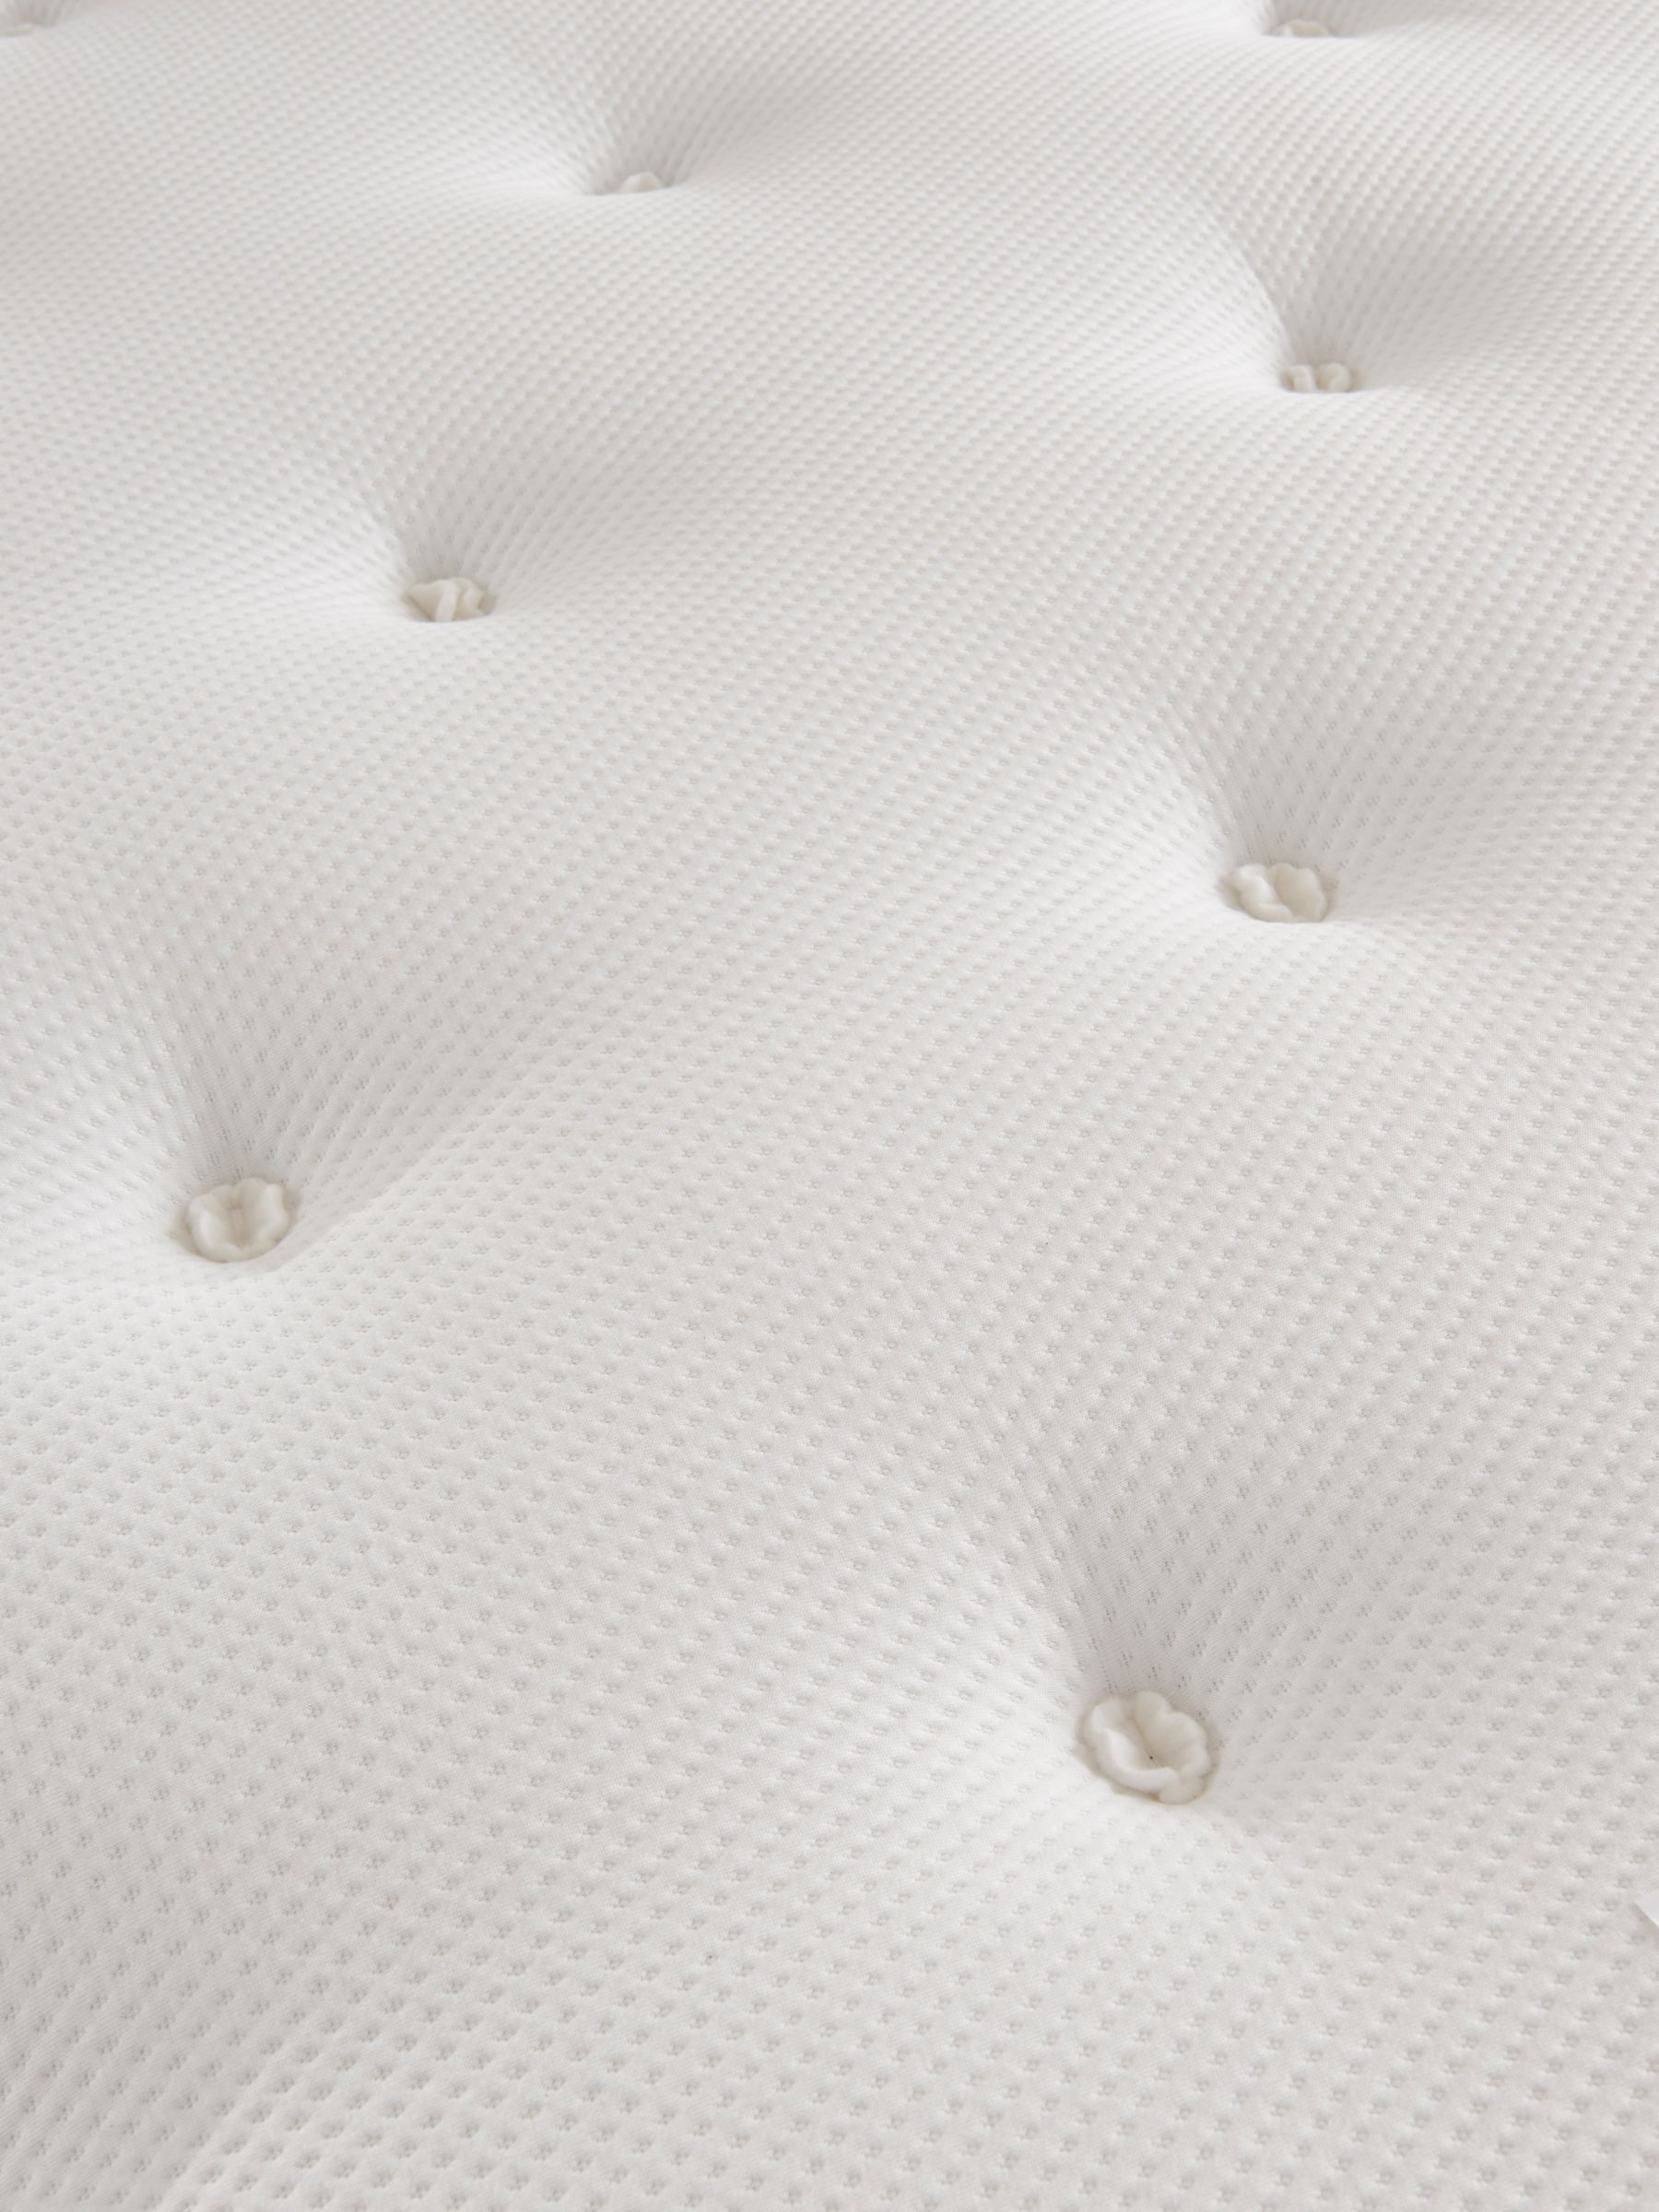 Photo of John lewis ortho support 2000 pocket spring mattress medium to firm tension double